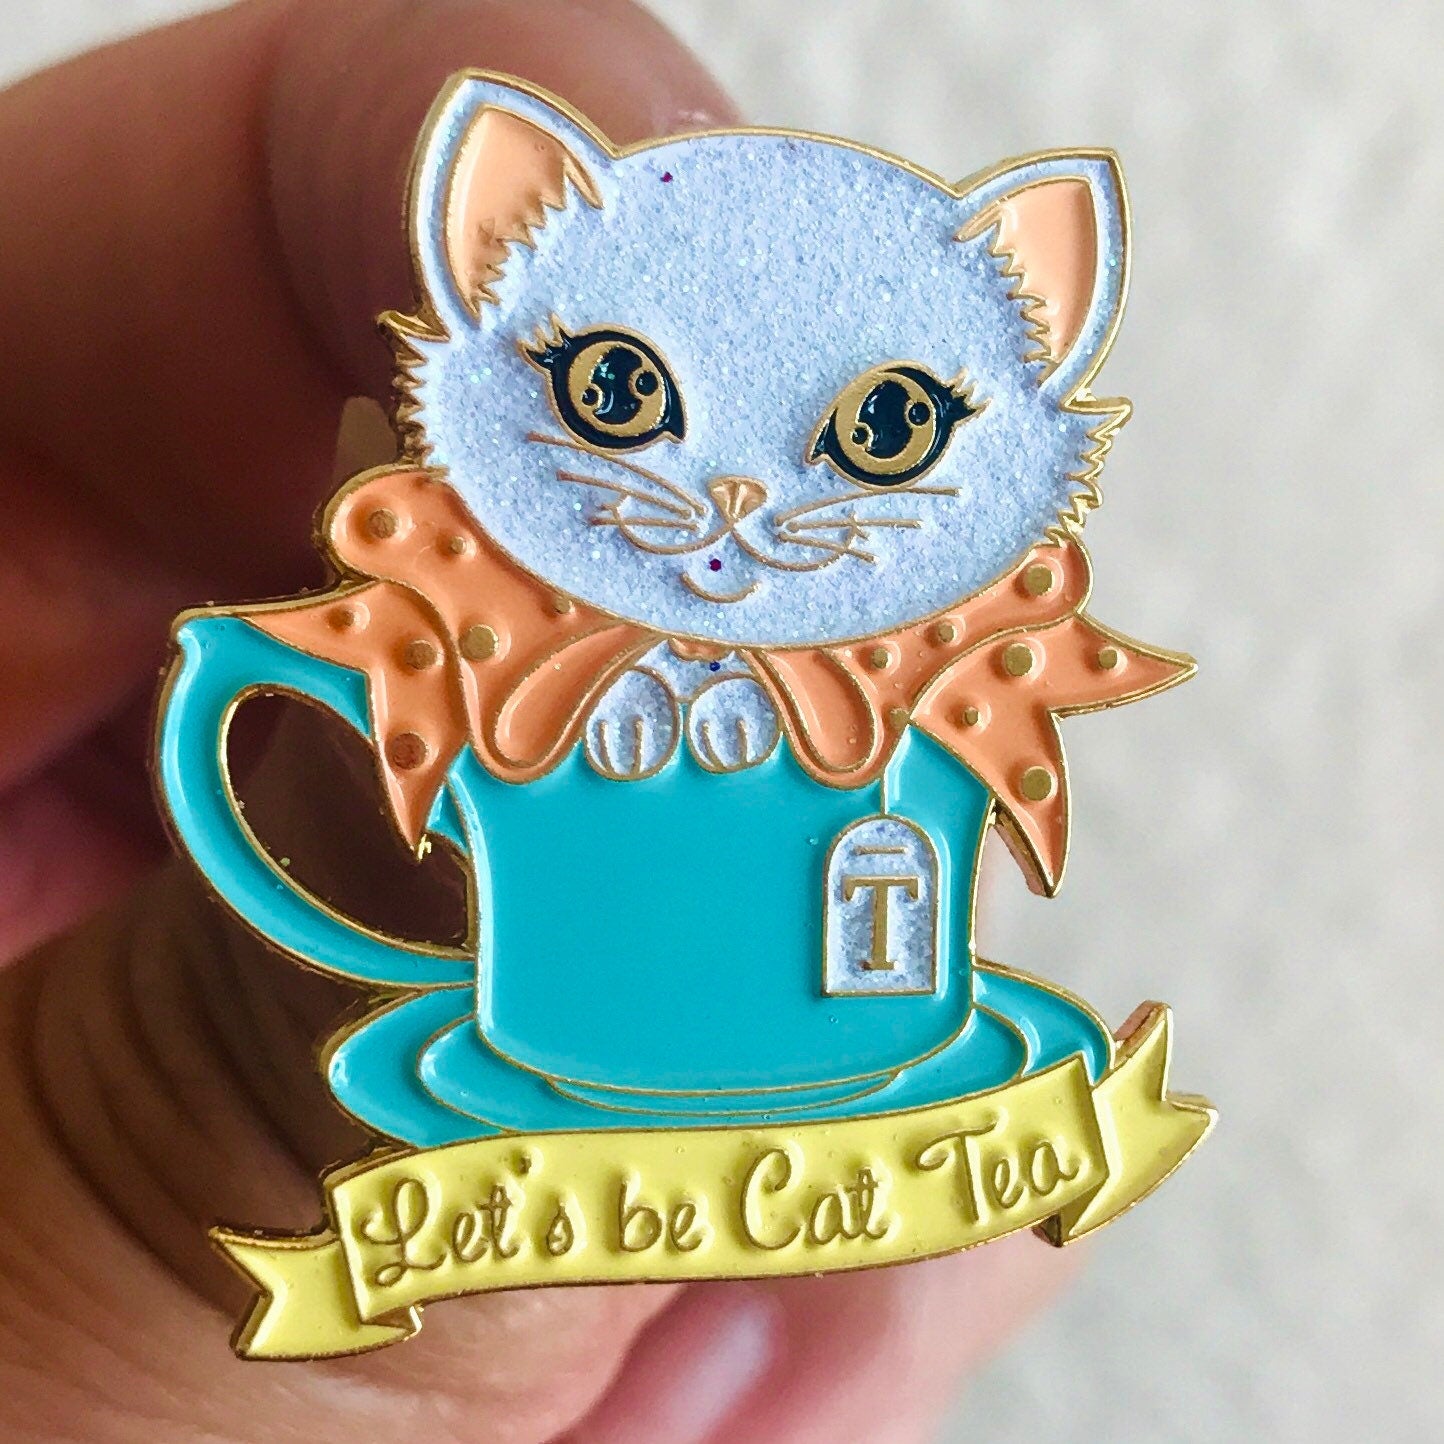 Let’s be Cat Tea soft enamel pin with glittery highlights